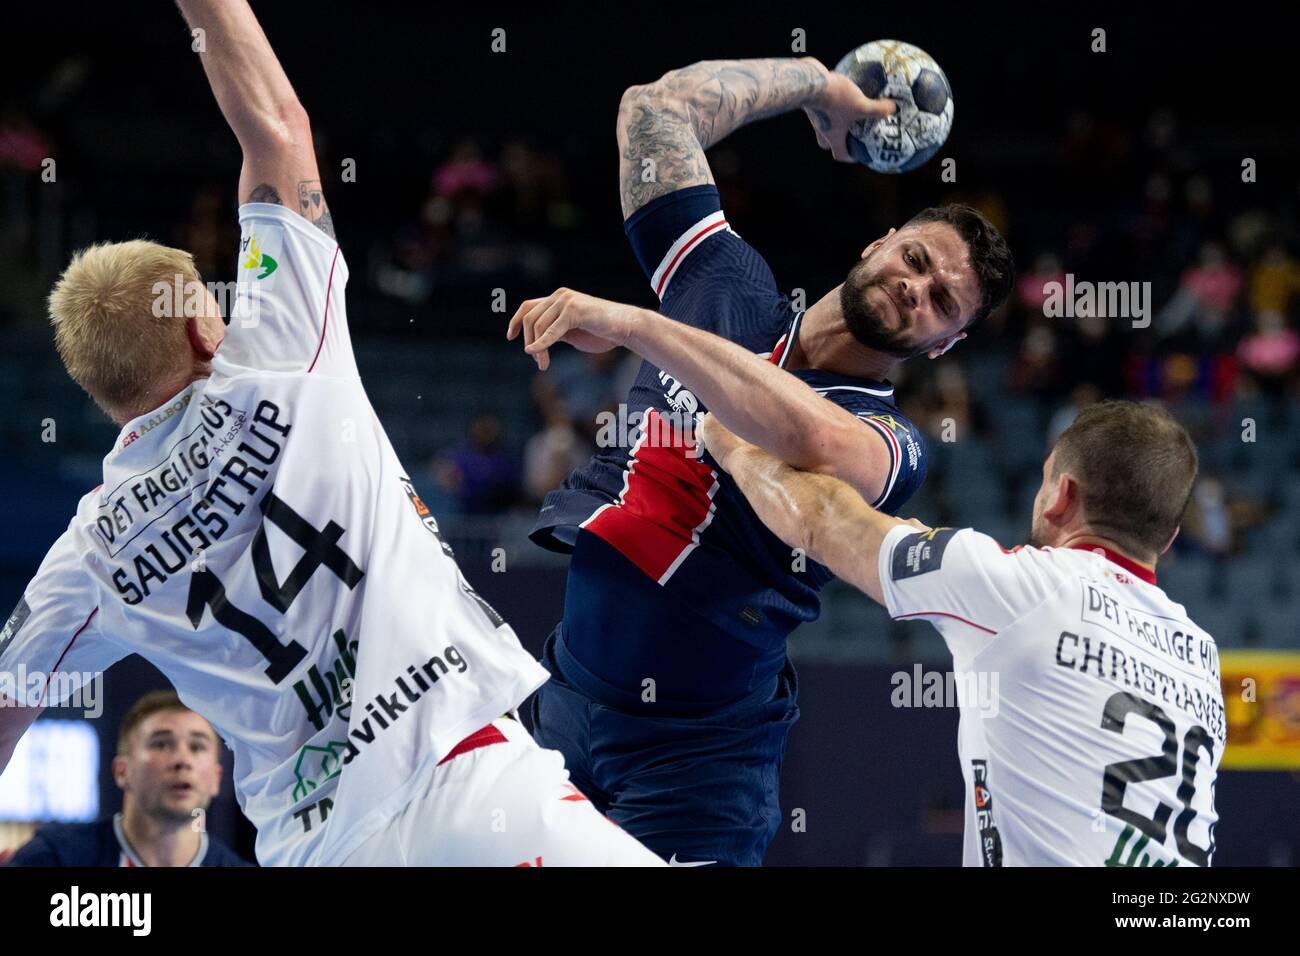 Cologne, Germany. 12th June, 2021. Handball: Champions League, Paris St.  Germain - Aalborg HB, final round, Final Four, semi-final at Lanxess Arena.  Magnus Saugstrup Jensen (l) and Mads Christiansen (r) of Aalborg